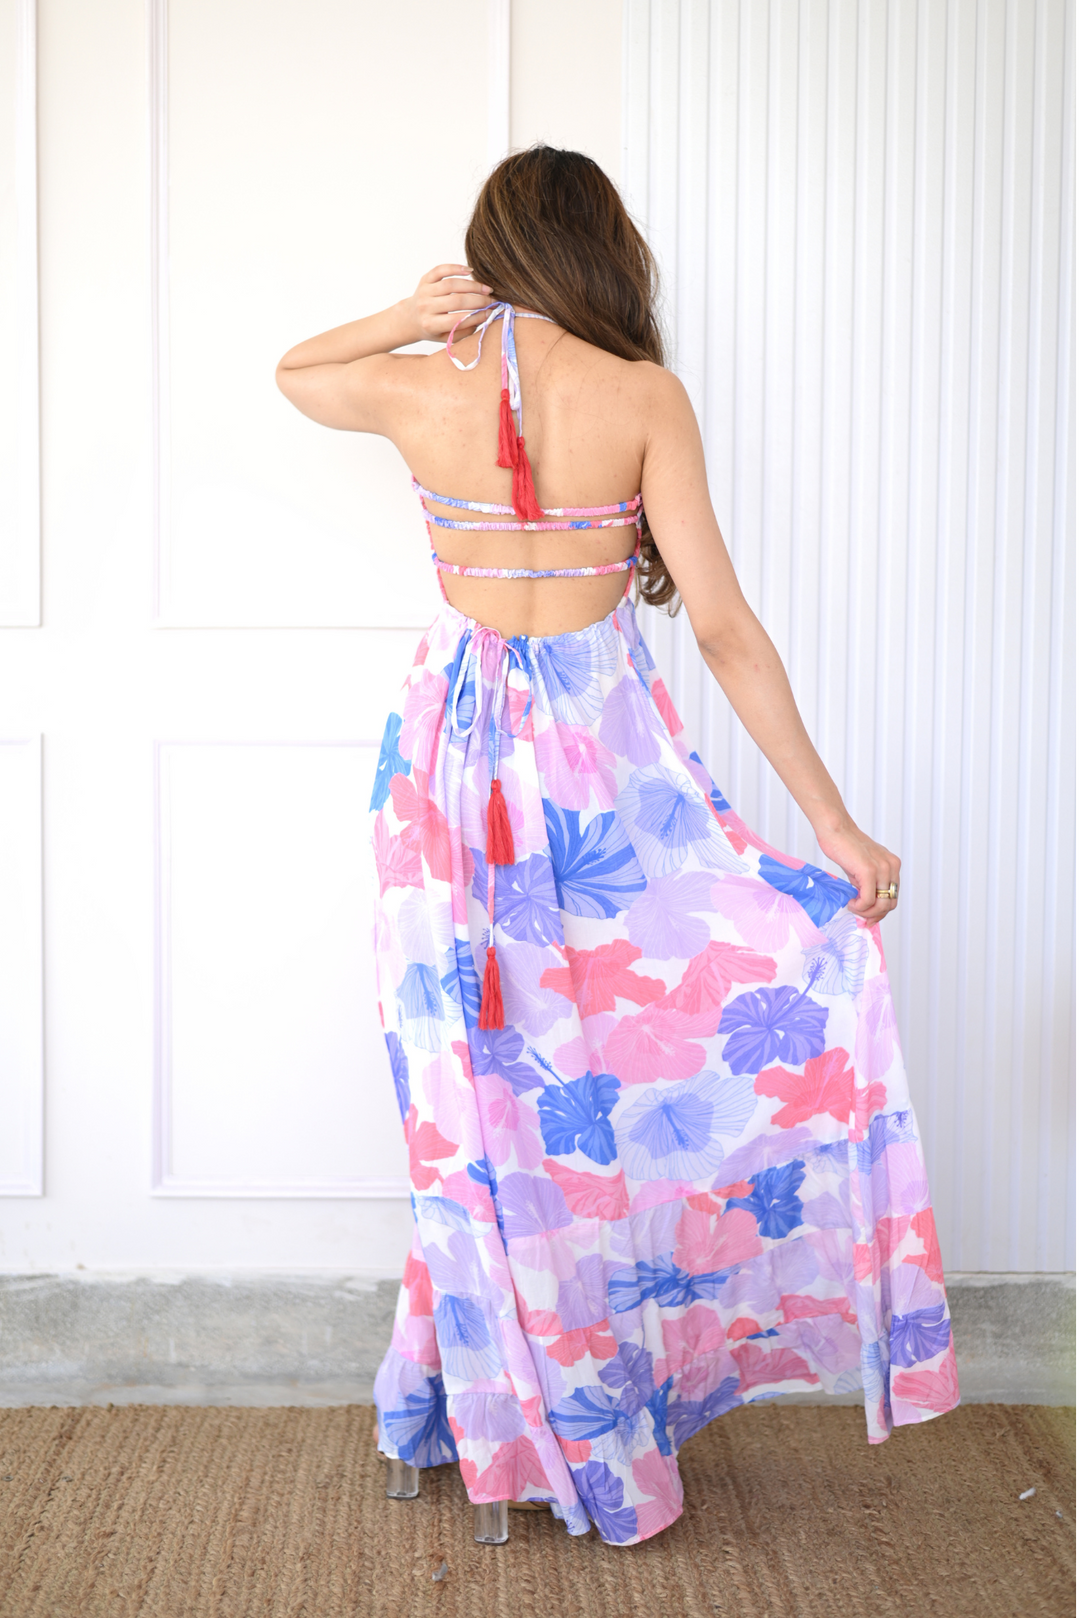 Floral print backless maxi dress for beach vacations